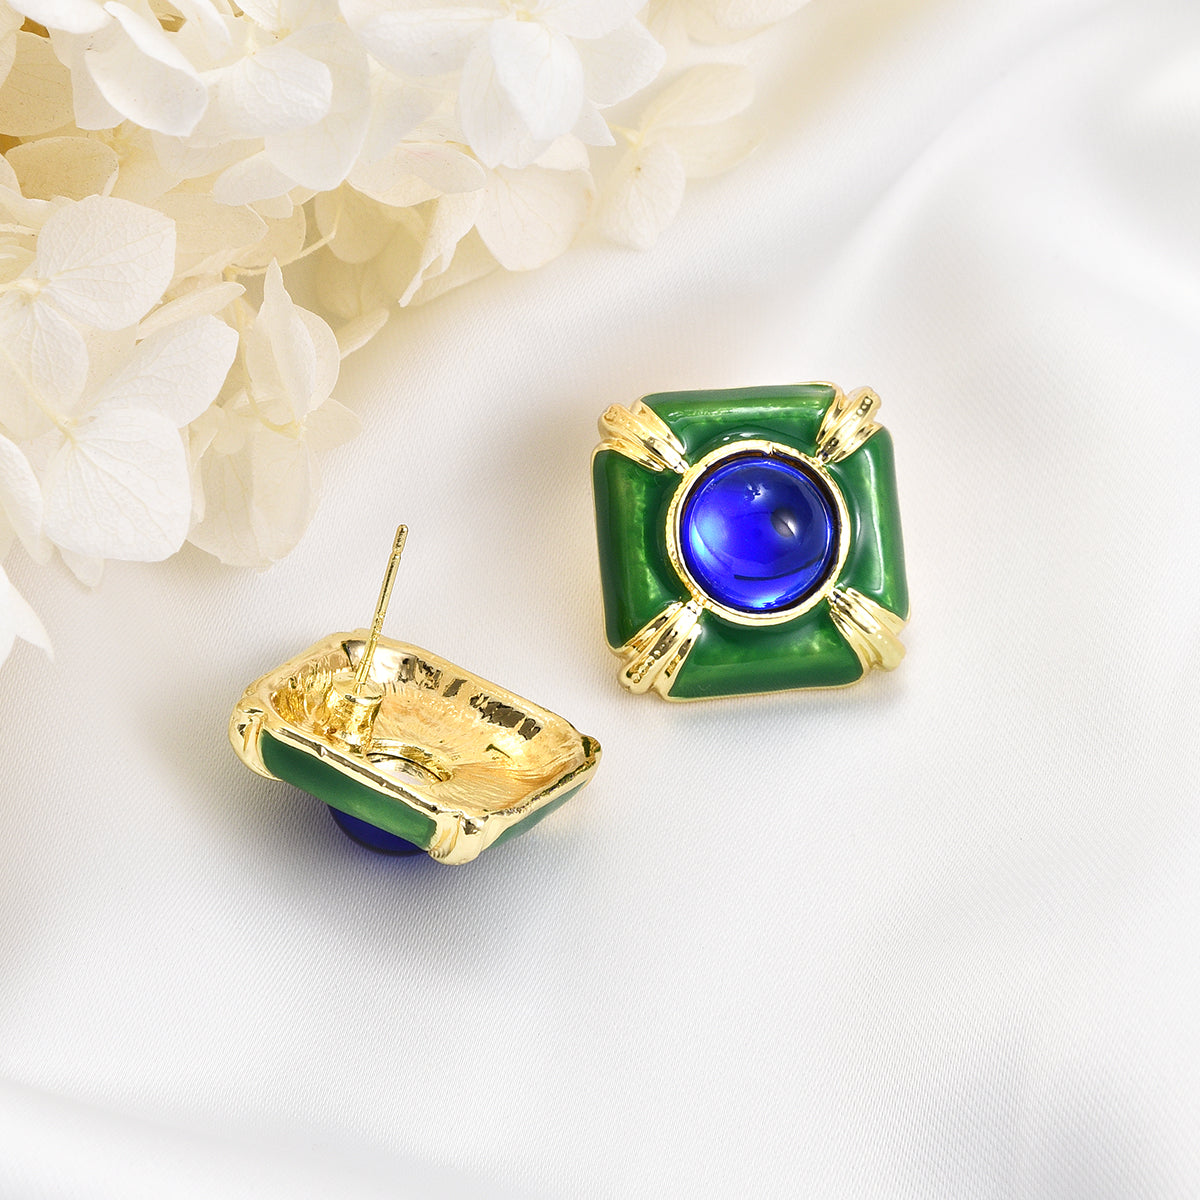 Source of oasis blue and green earrings with golden stripes